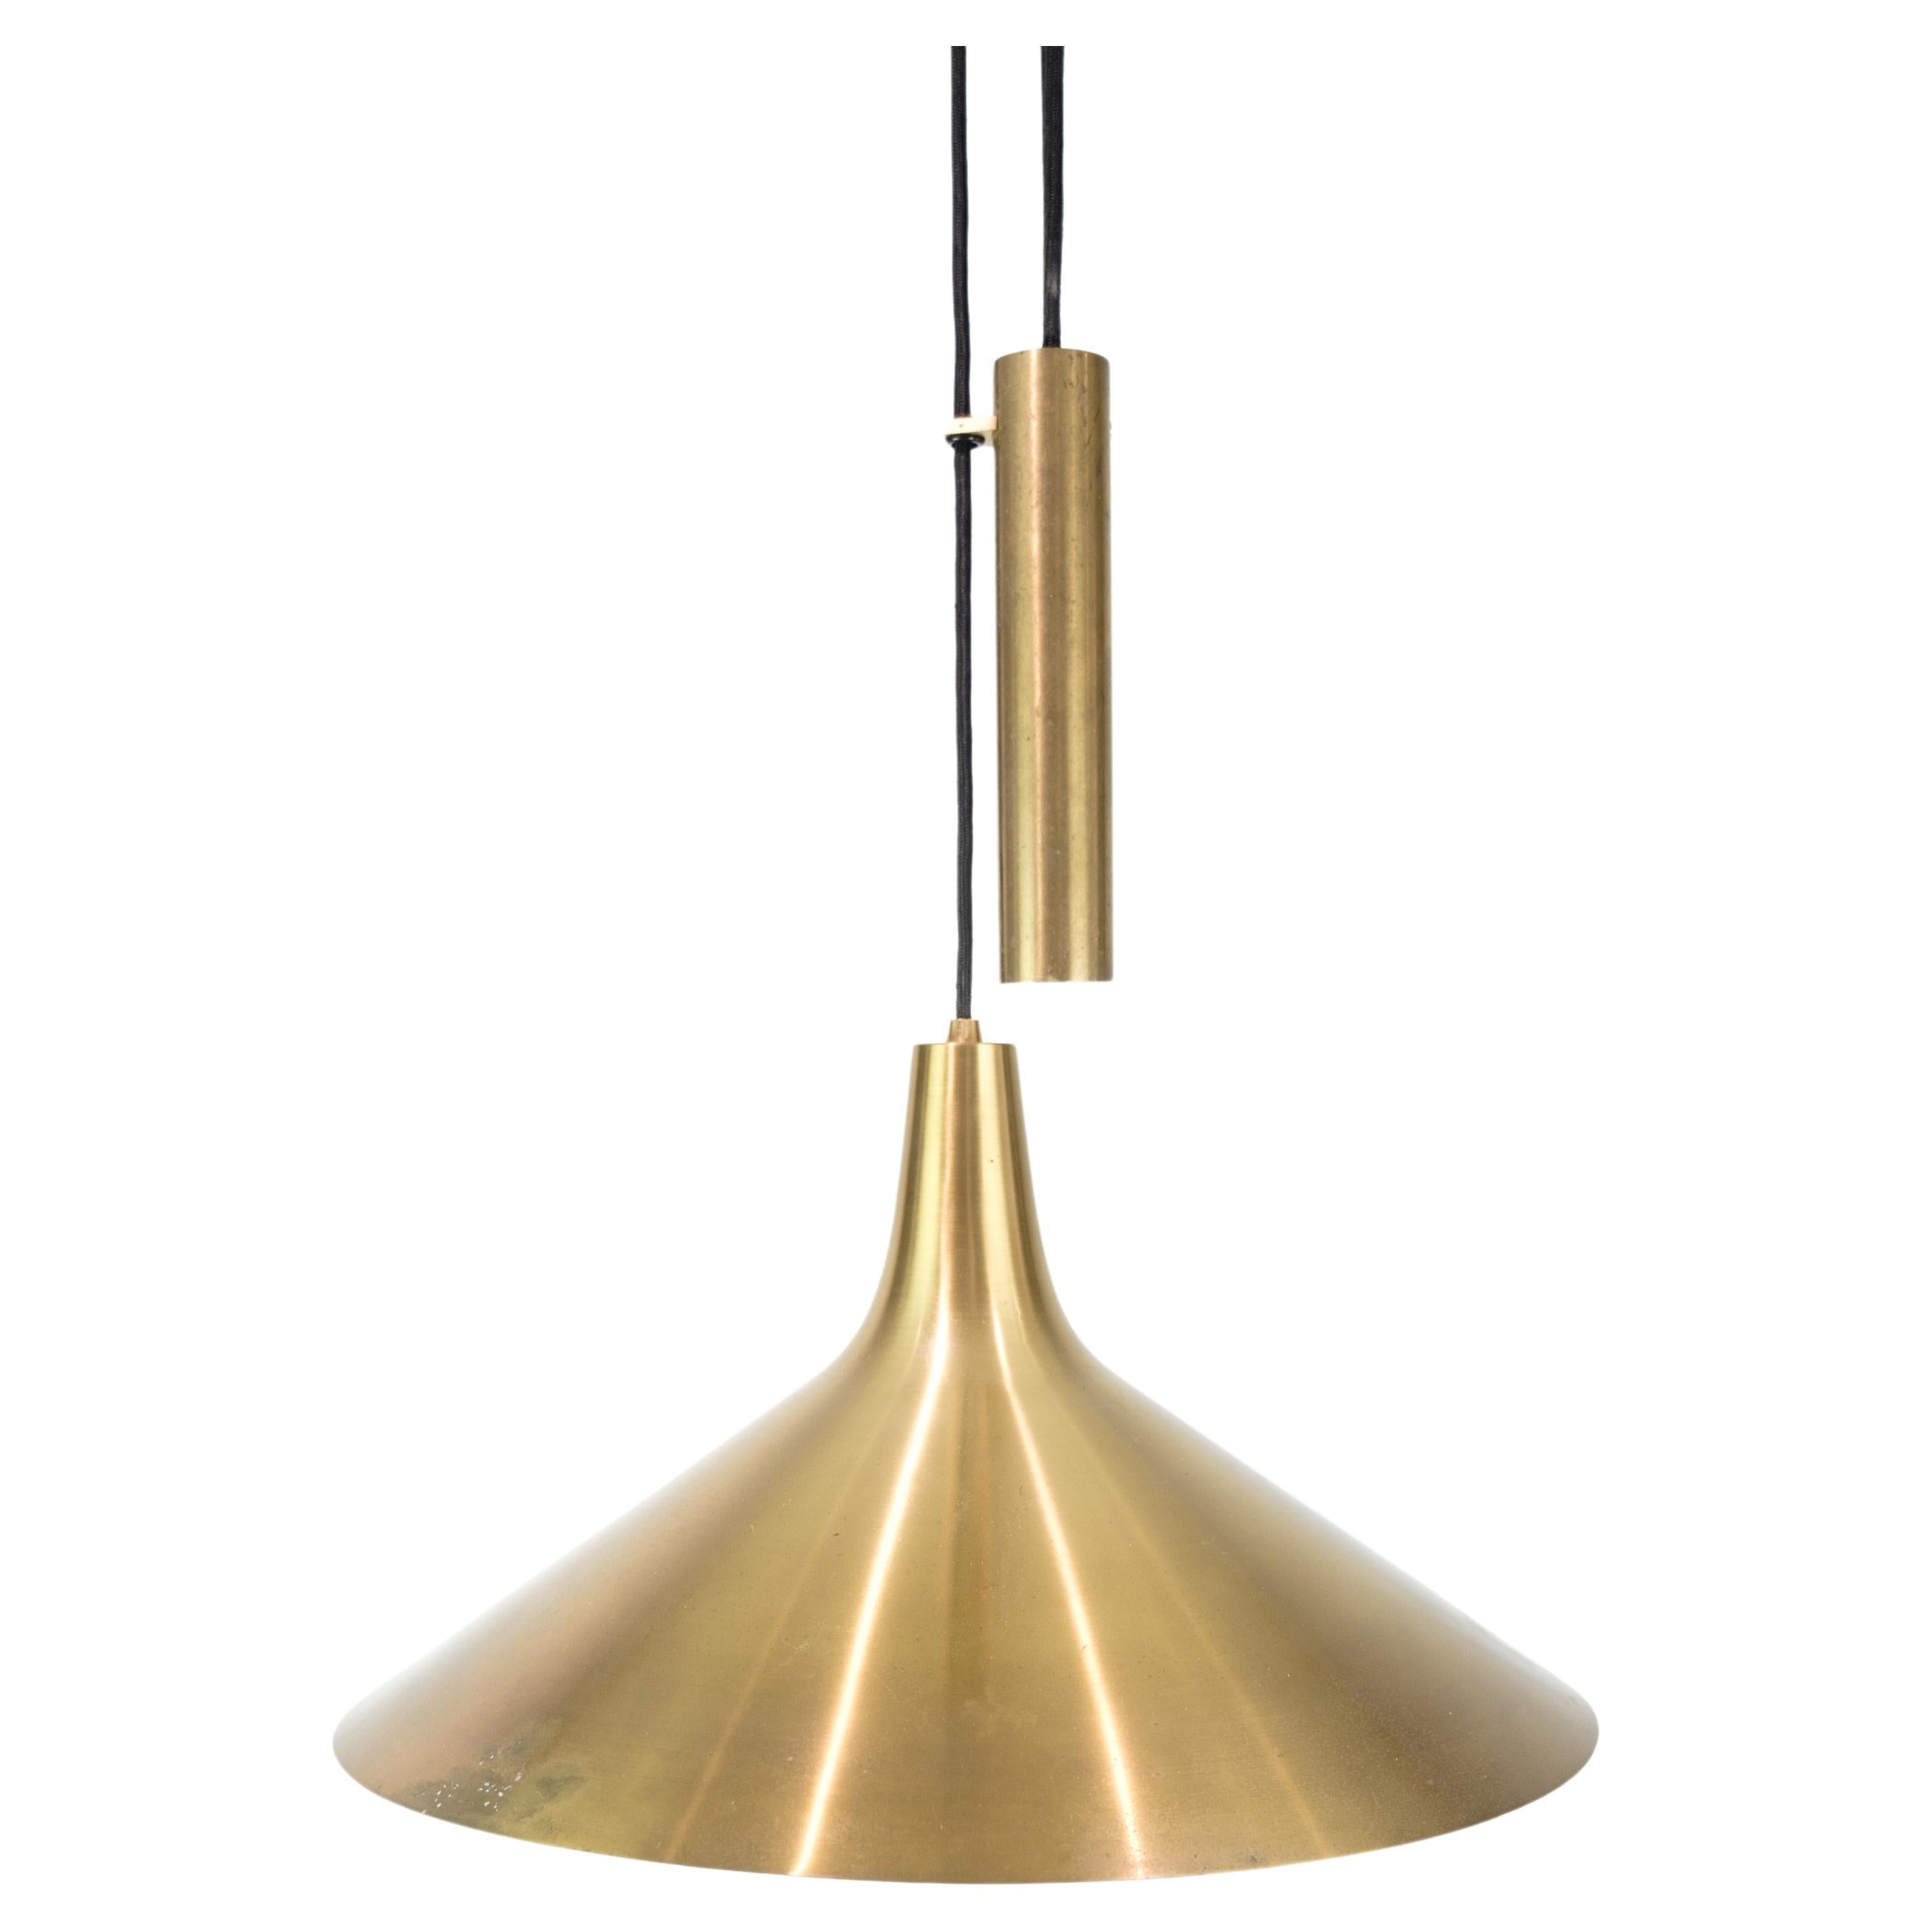 Ceiling lamp In Brass With a Counterweight Pendant, Made by Lyfa From 1960s For Sale